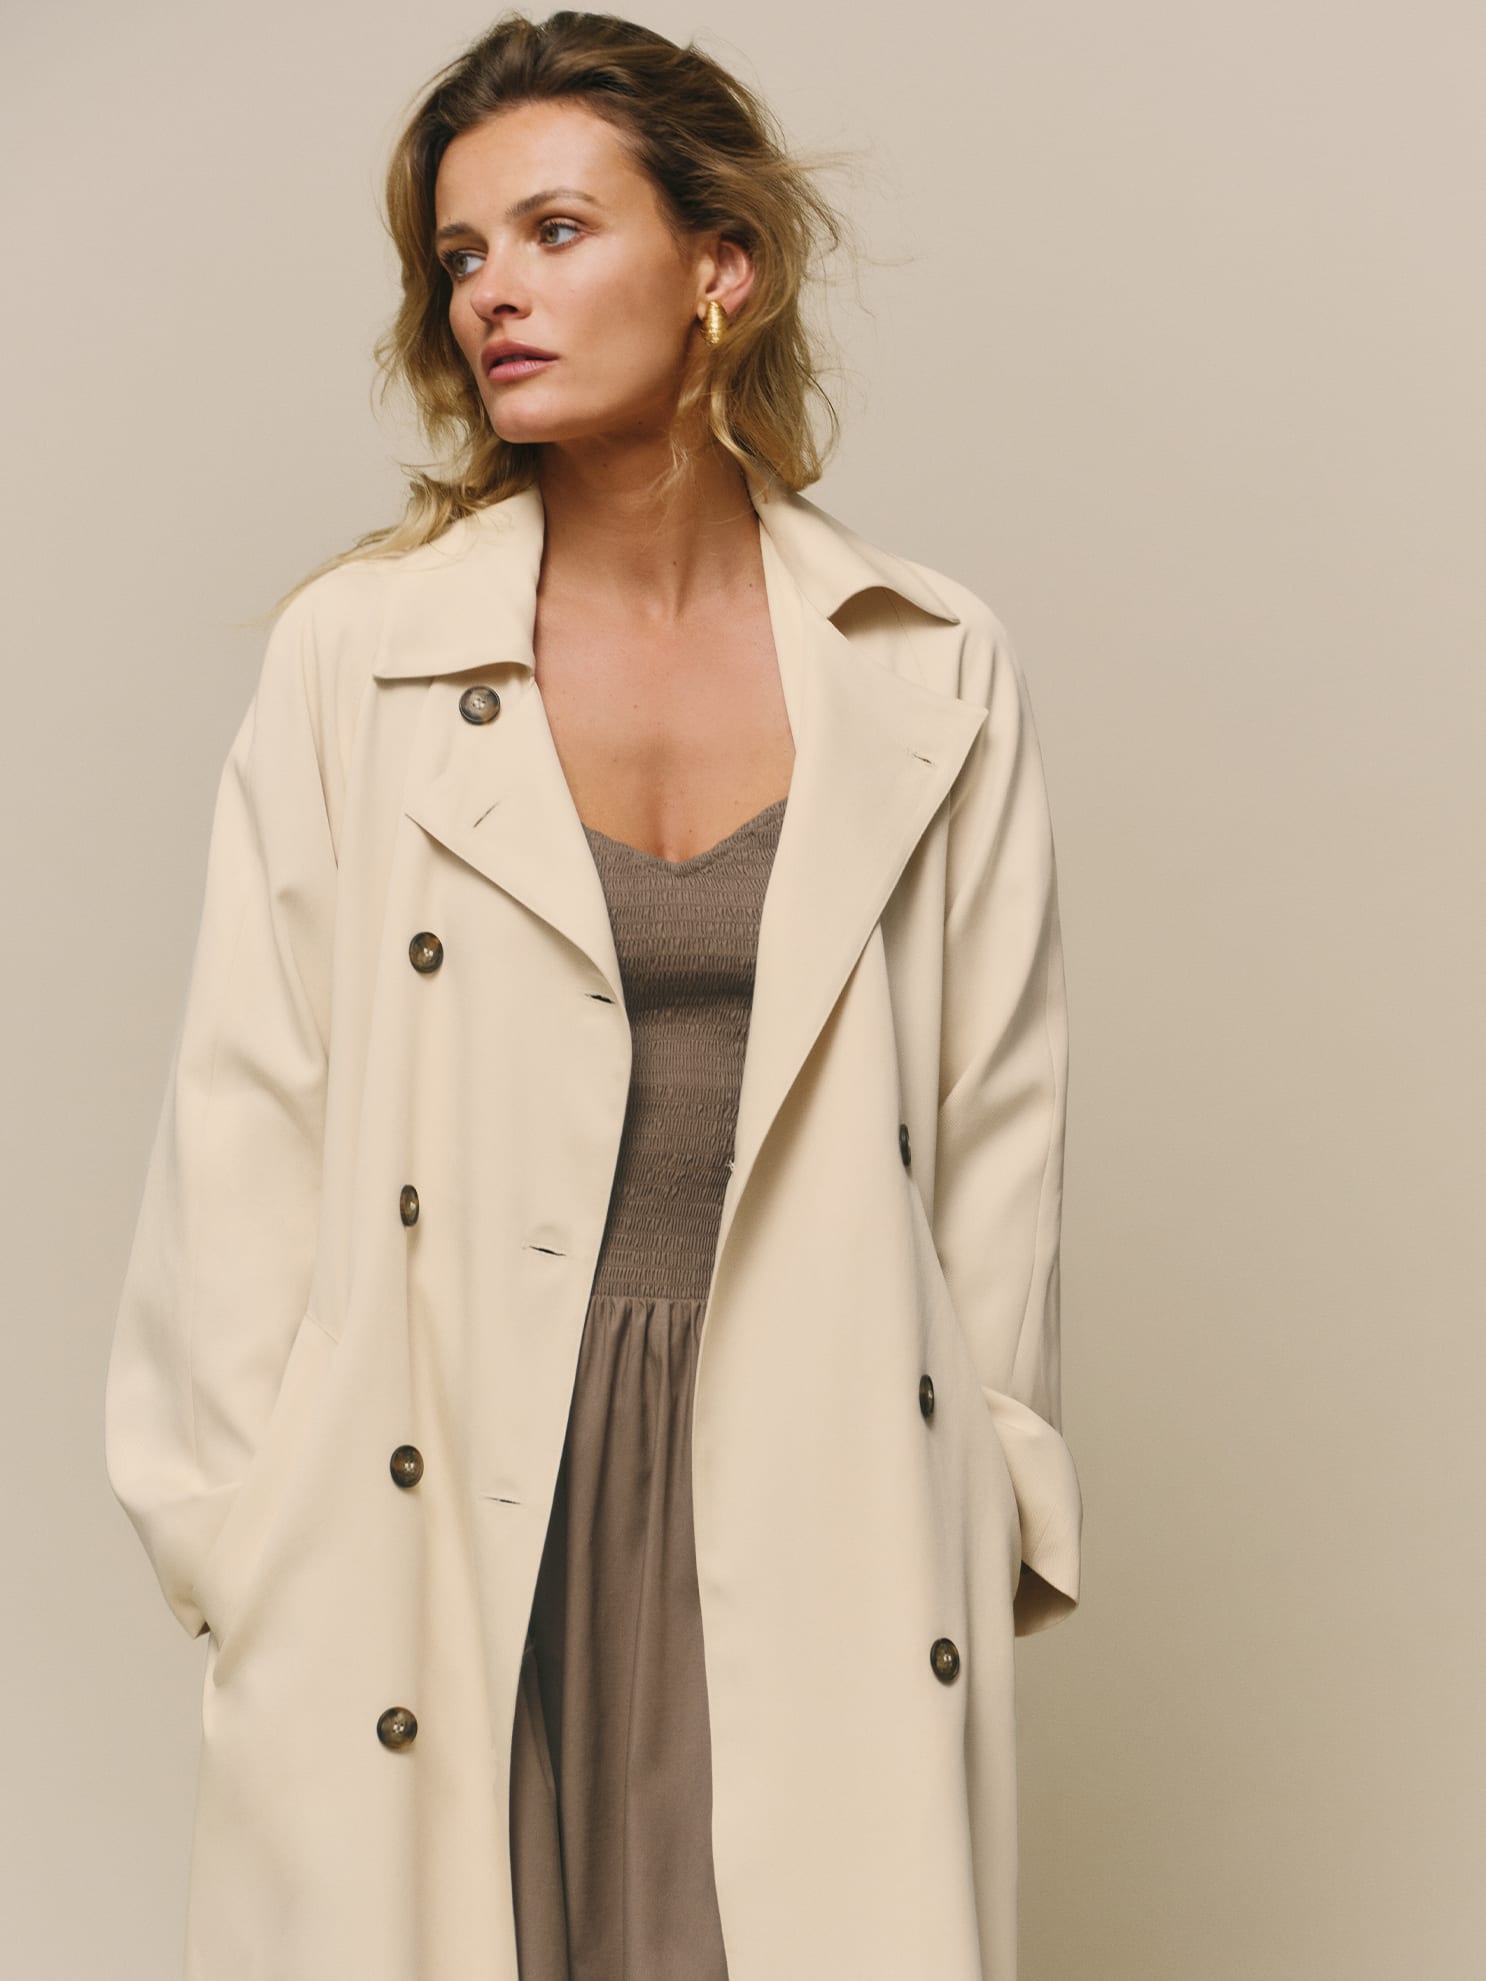 Reformation Kensington Trench In Oyster